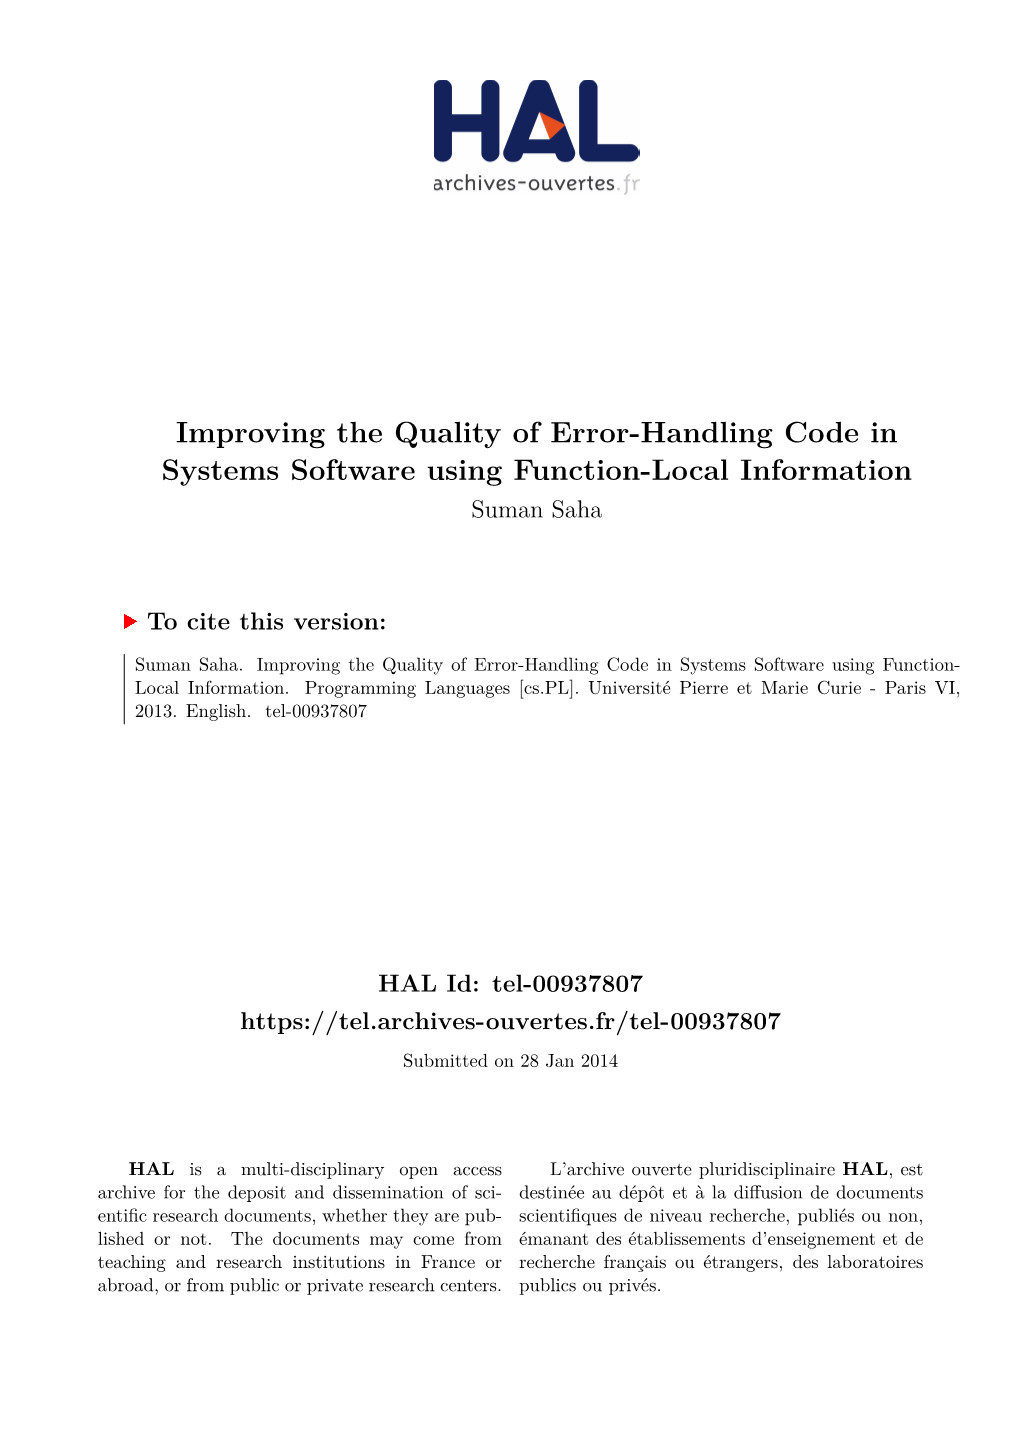 Improving the Quality of Error-Handling Code in Systems Software Using Function-Local Information Suman Saha